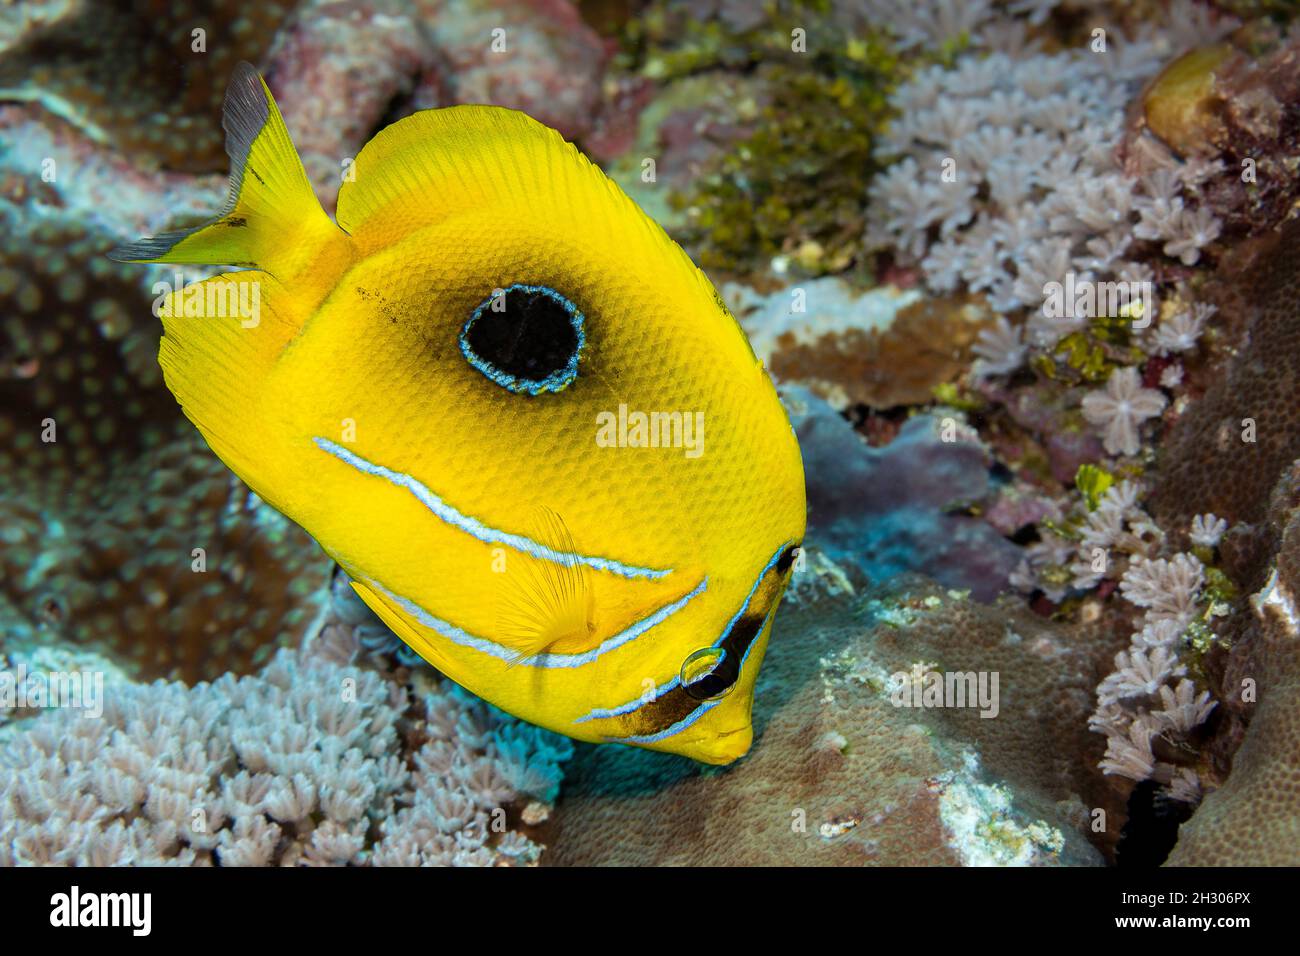 BennettÕs butterflyfish, Chaetodon bennetti, feeds mostly on coral polyps, Yap, Federated States of Micronesia. Stock Photo